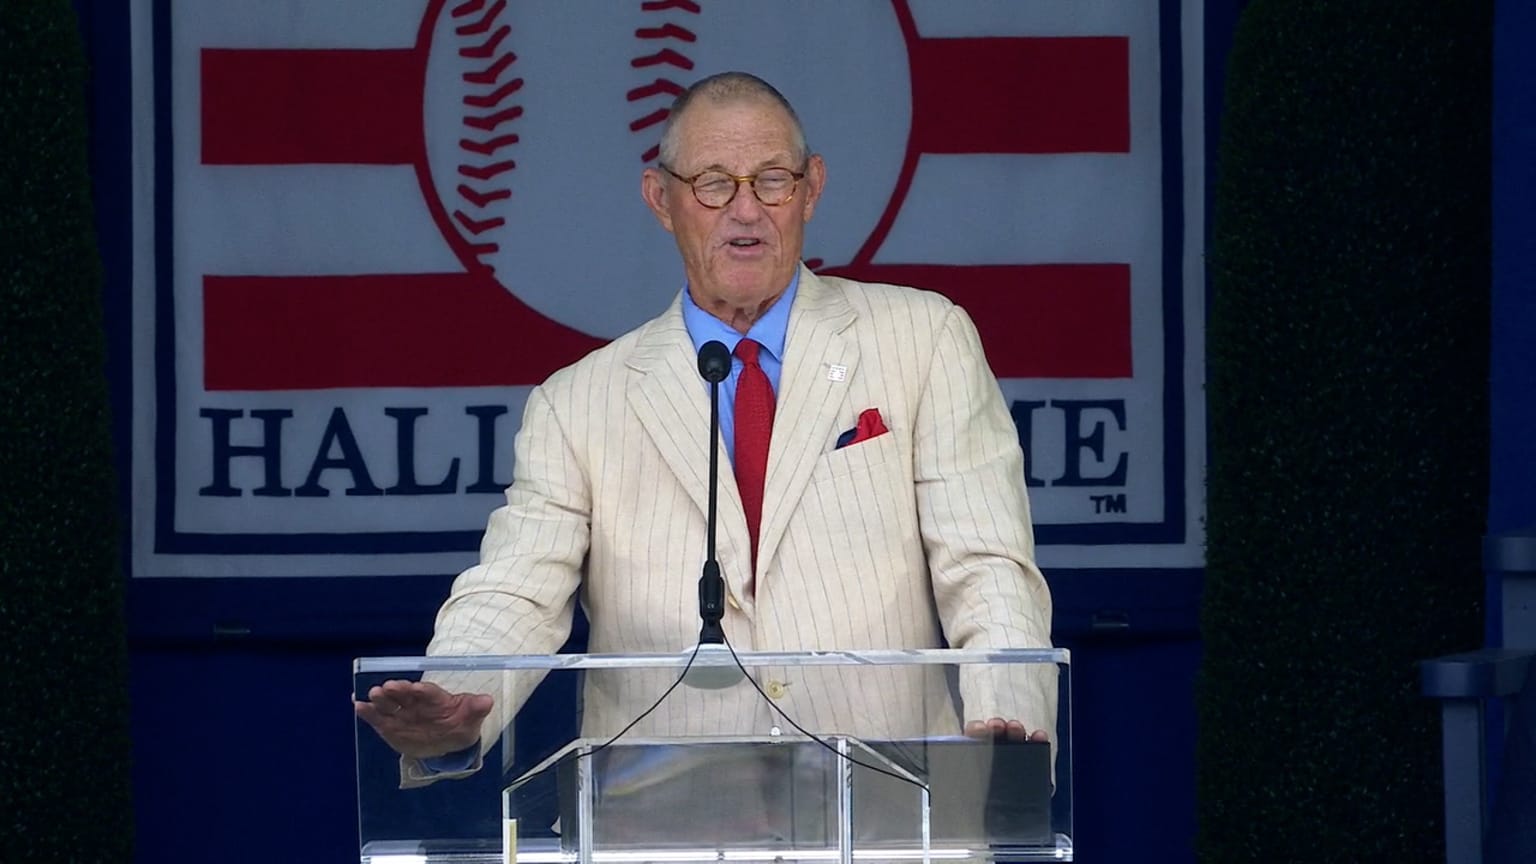 Taking some Hall of Fame advice, Jim Kaat keeps remarks short at